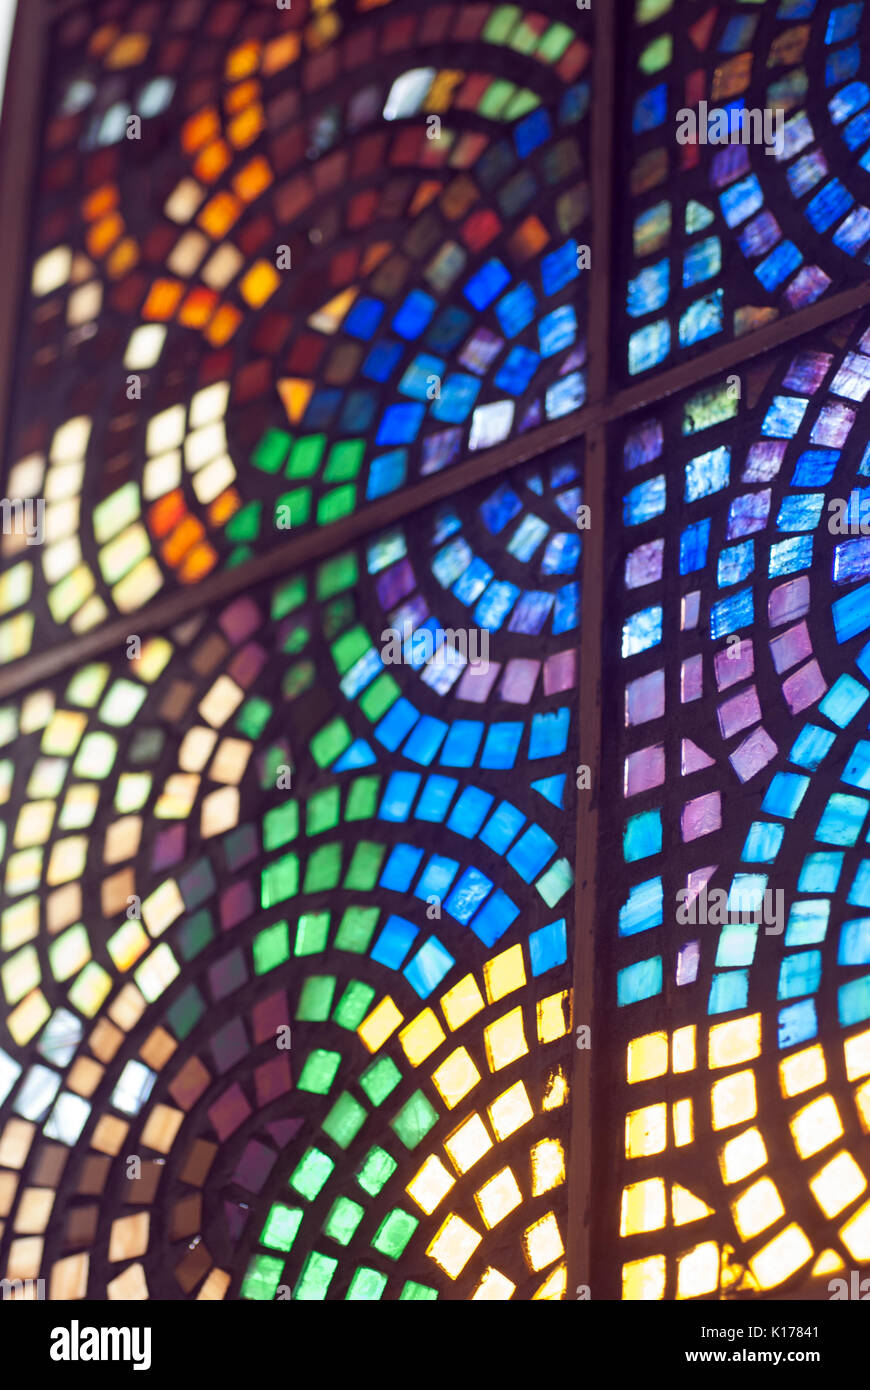 Colorful stained glass mosaic Stock Photo